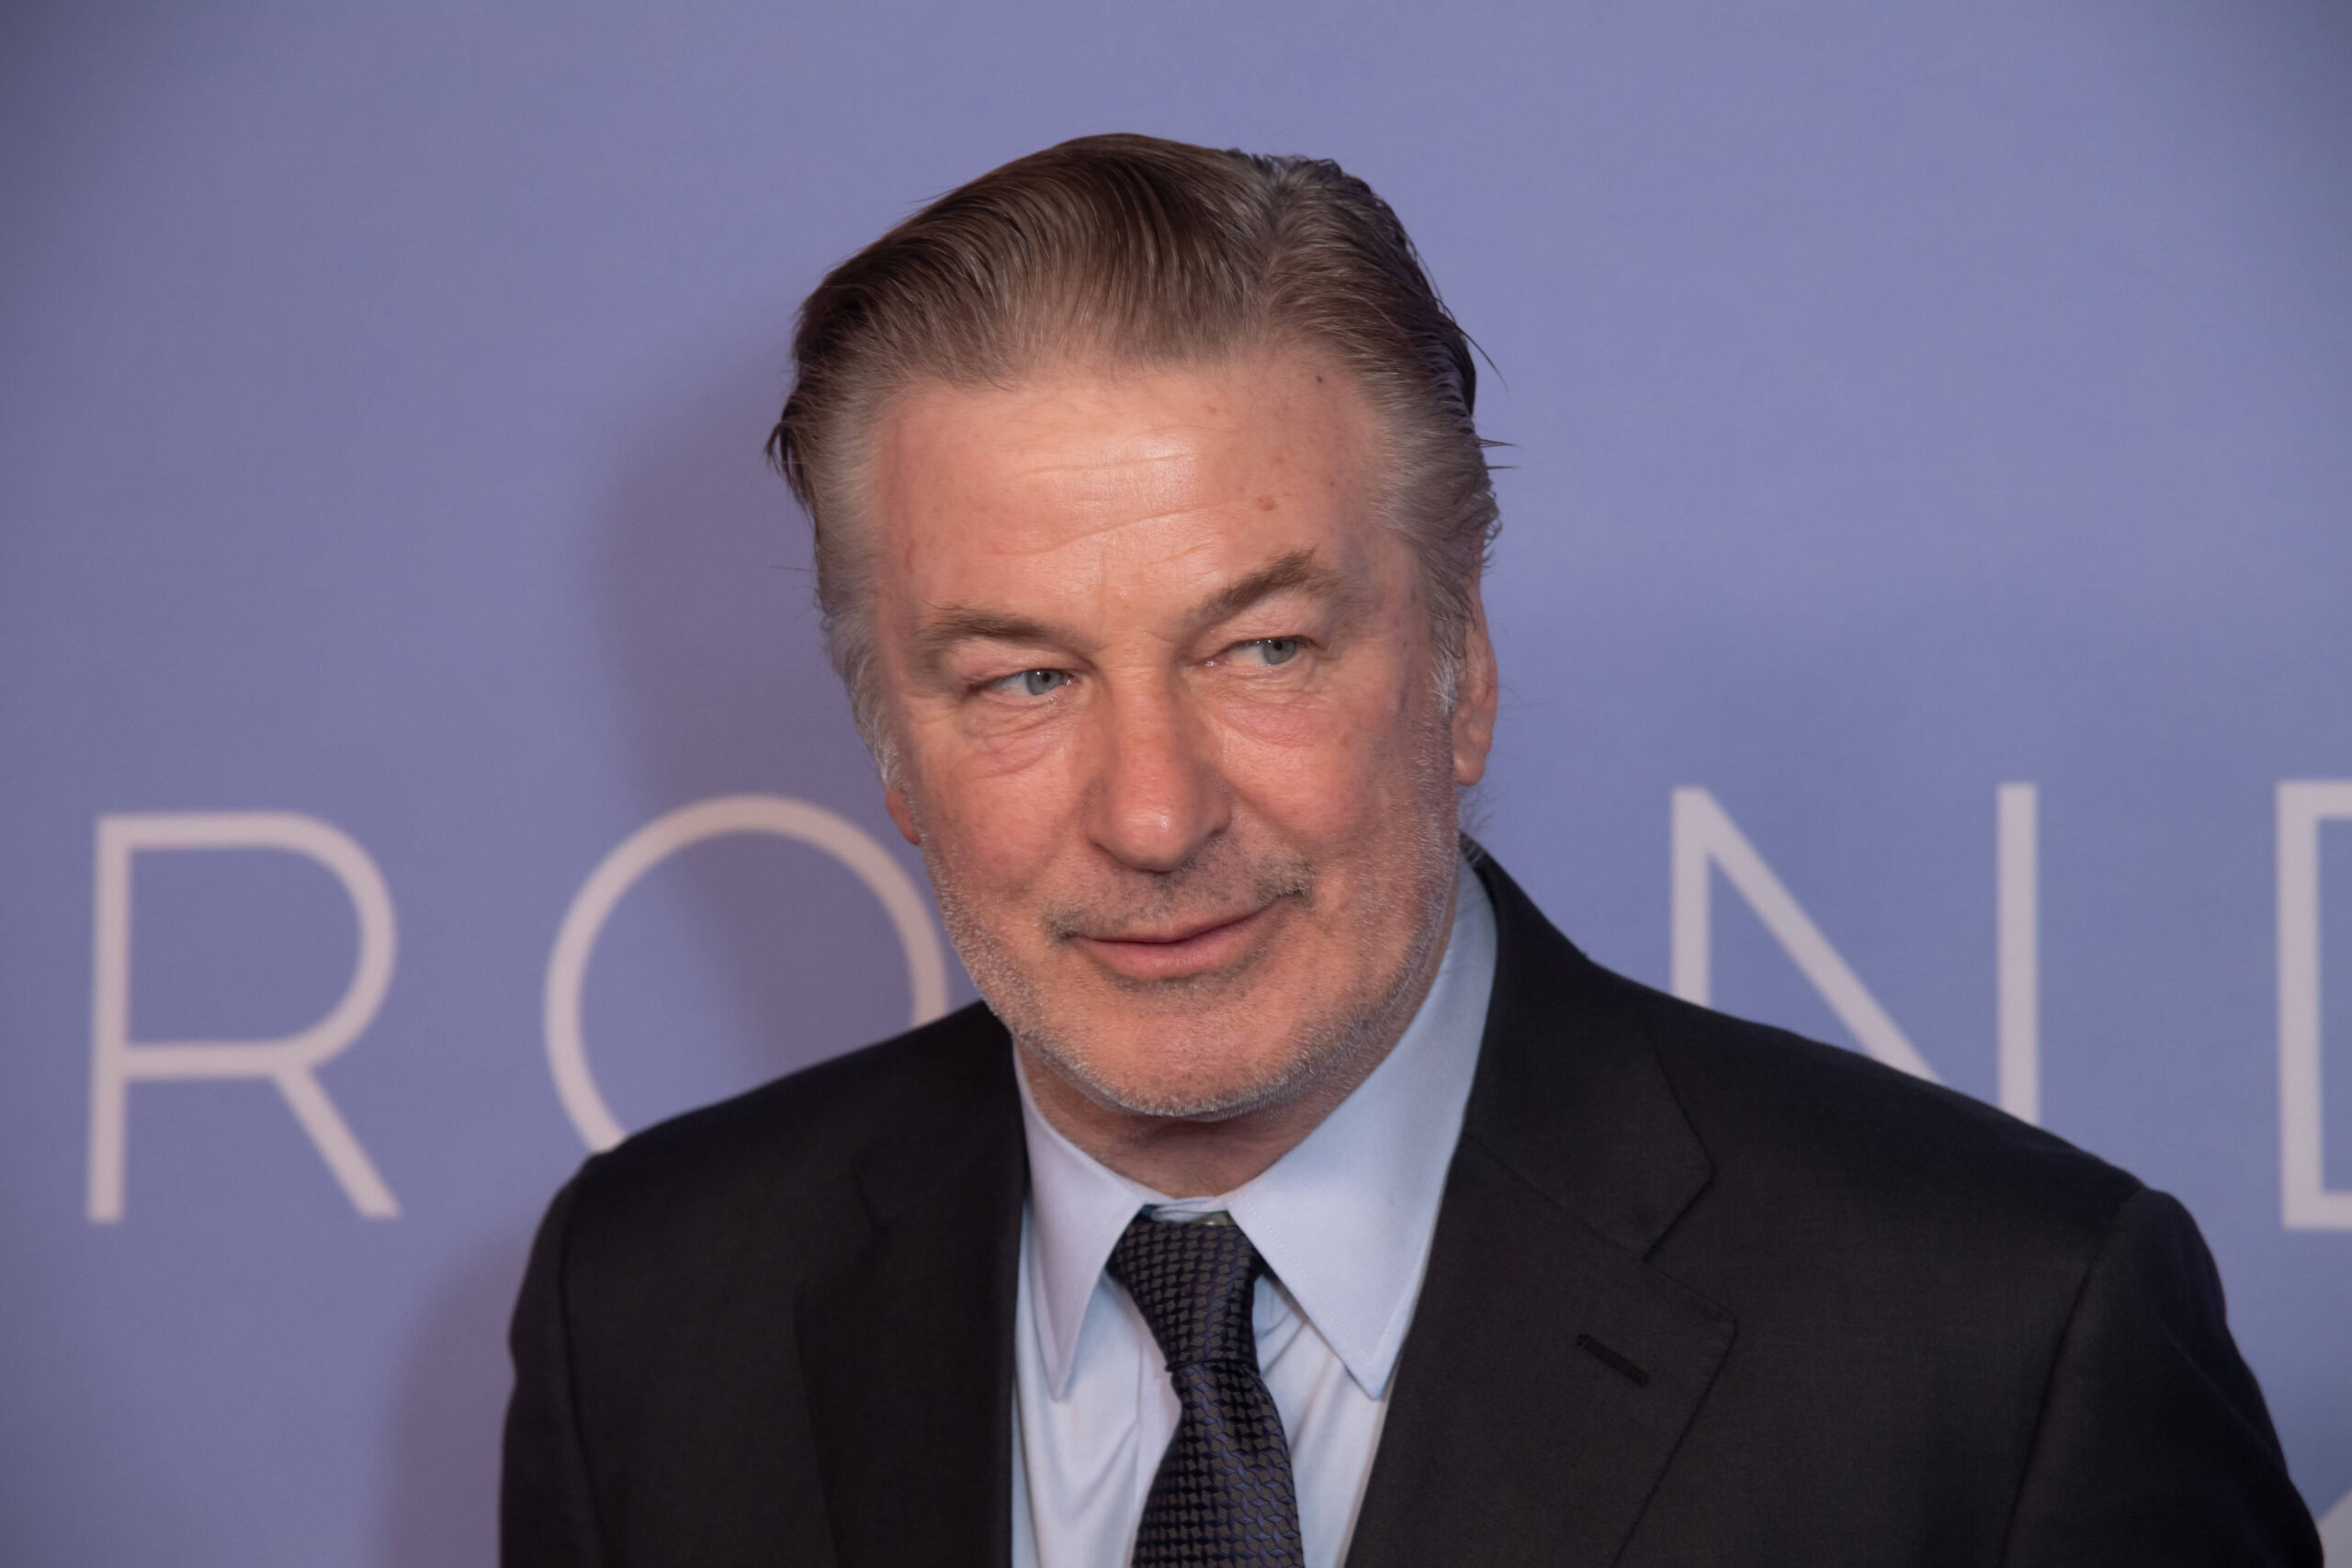 2023 Roundabout Theatre Company Gala NEW 2023 Roundabout Theatre Company Gala. March 06, 2023, New York, New York, USA: Alec Baldwin attends the 2022 Roundabout Theatre Company Gala at The Ziegfeld Ballroom on March 06, 2023 in New York City. Credit: M10s / TheNews2 Foto: M10s/TheNews2/imago images 2023 Roundabout Theatre Company Gala PUBLICATIONxNOTxINxUSA Copyright: xM10sx